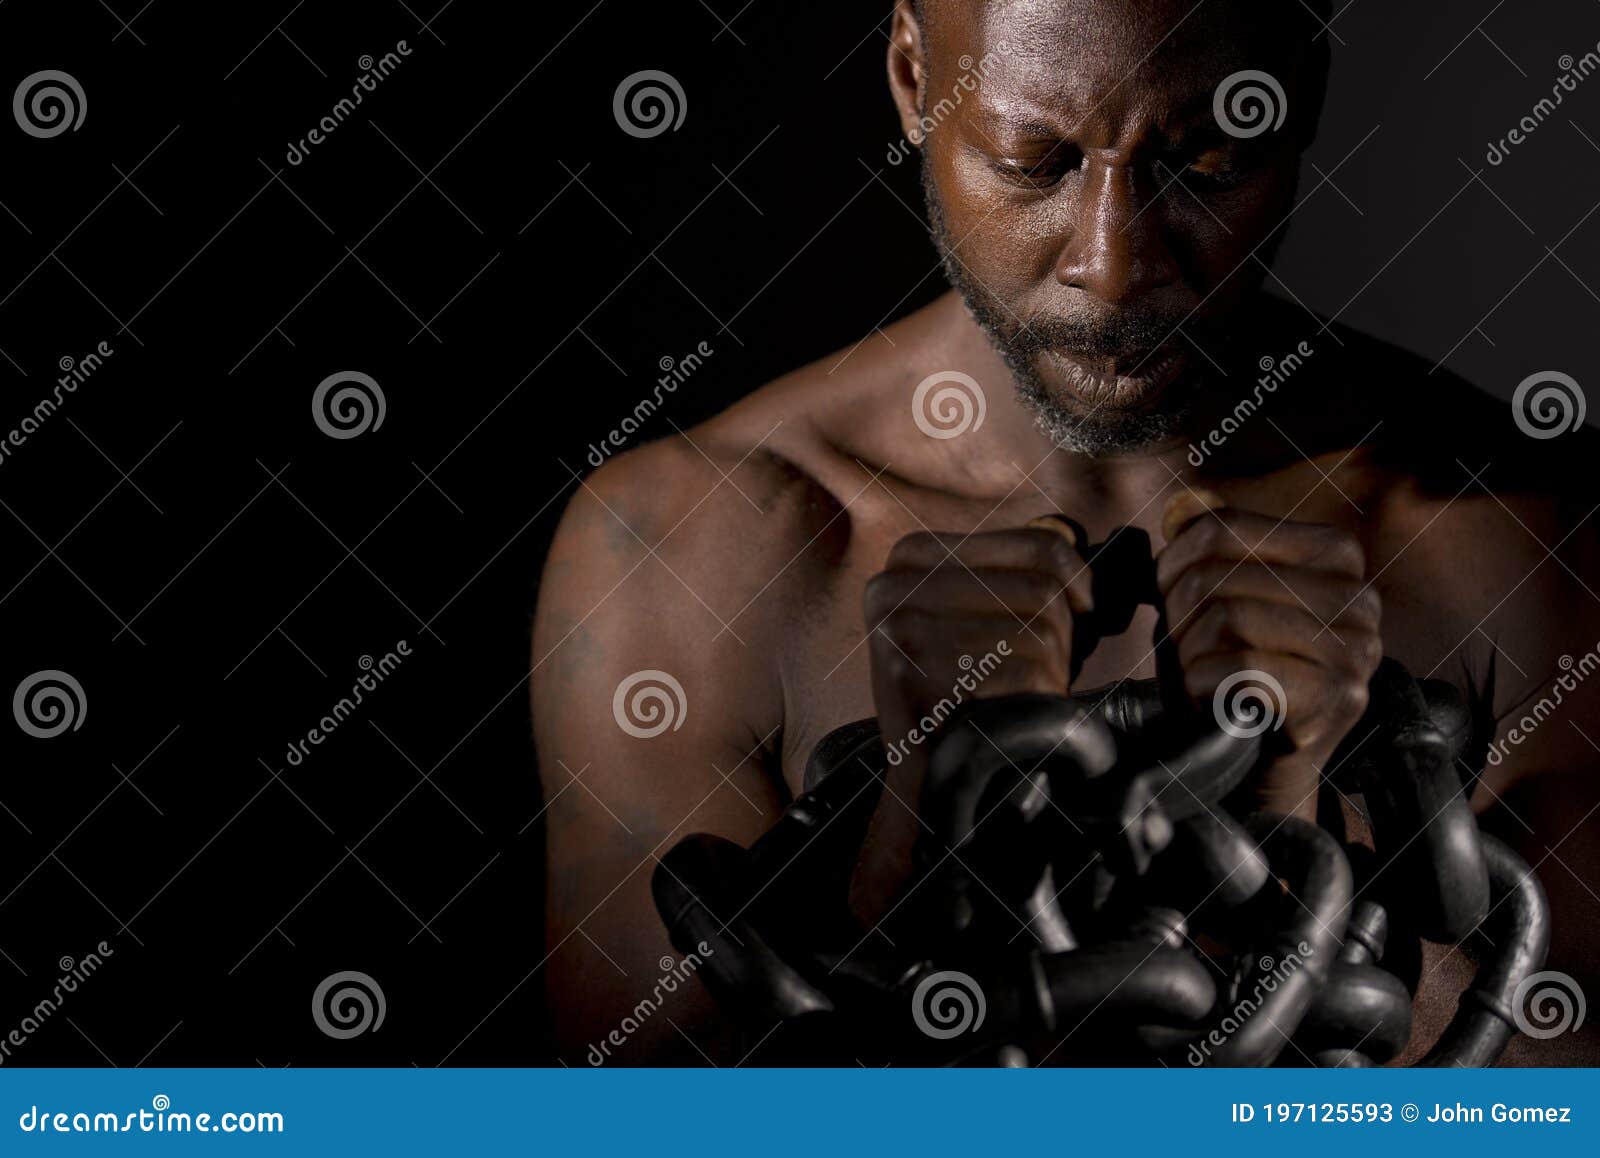 pensive black man holding large heavy chains.